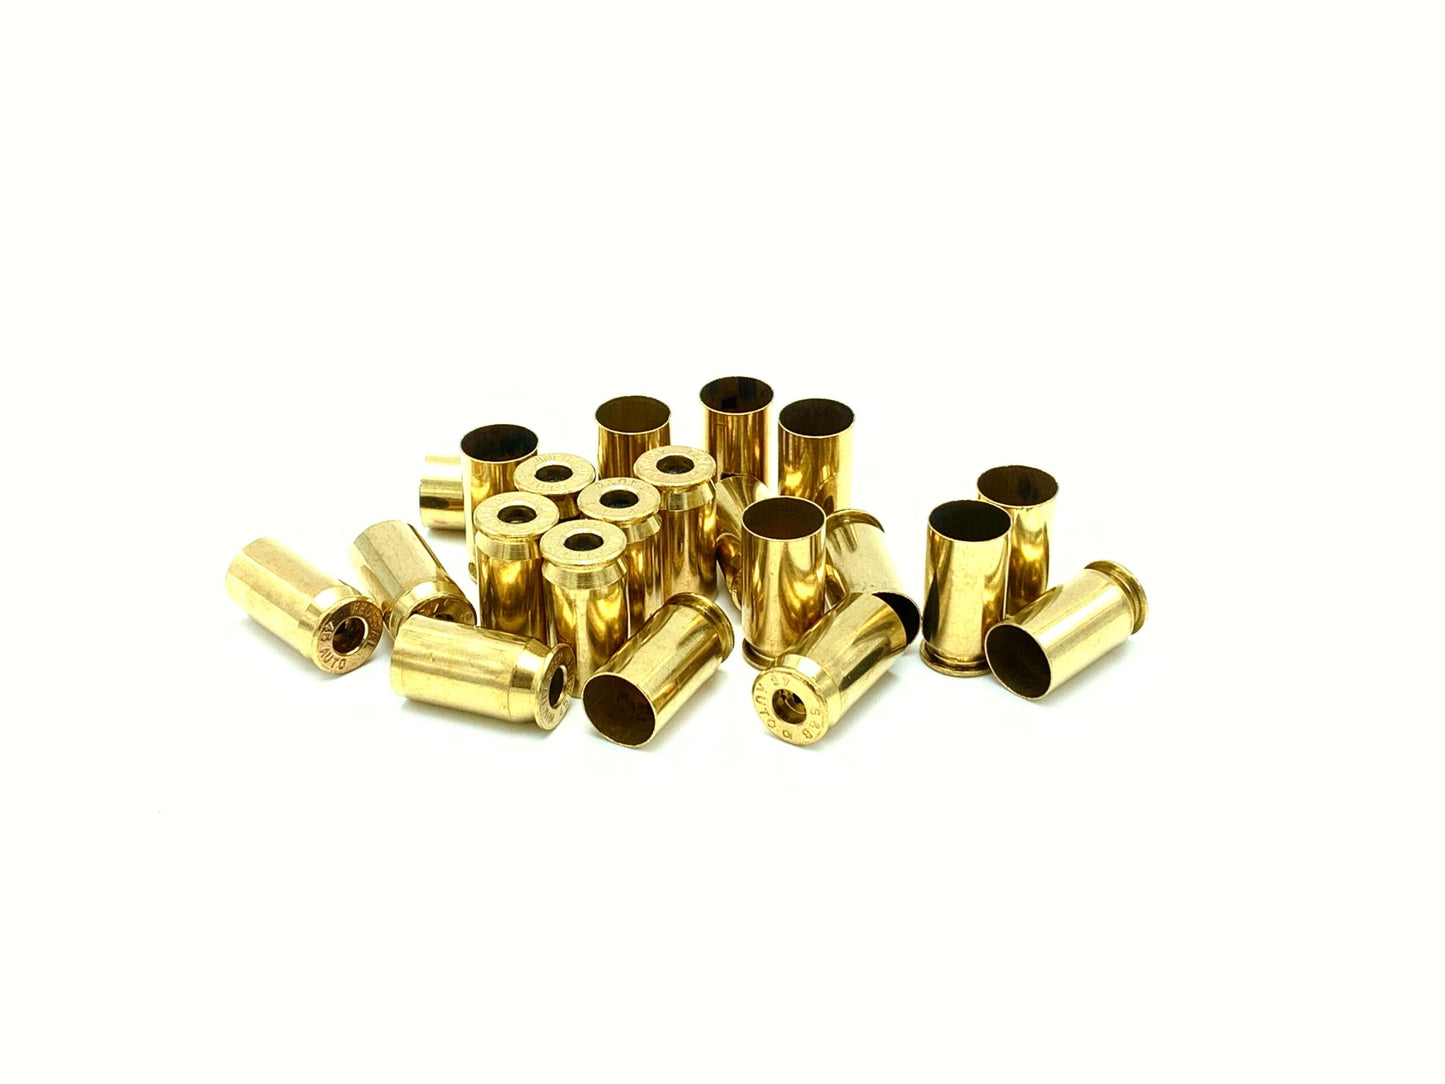 SMALL PRIMER 45 ACP BRASS PROCESSED 250 COUNT